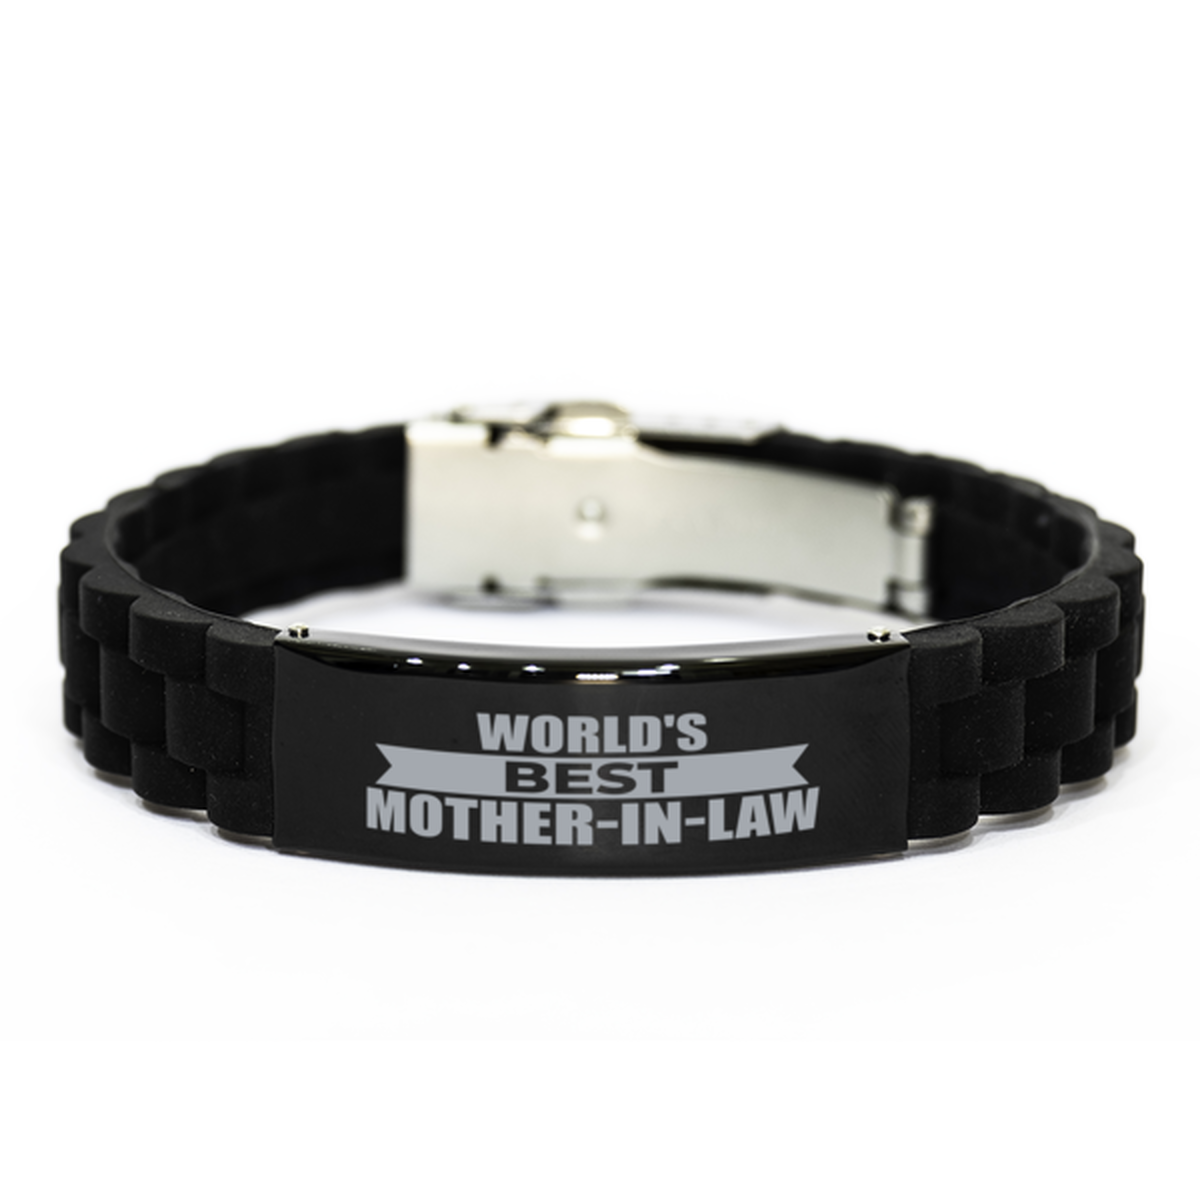 World's Best Mother-in-law Gifts, Funny Black Engraved Bracelet For Mother-in-law, Family Gifts For Women